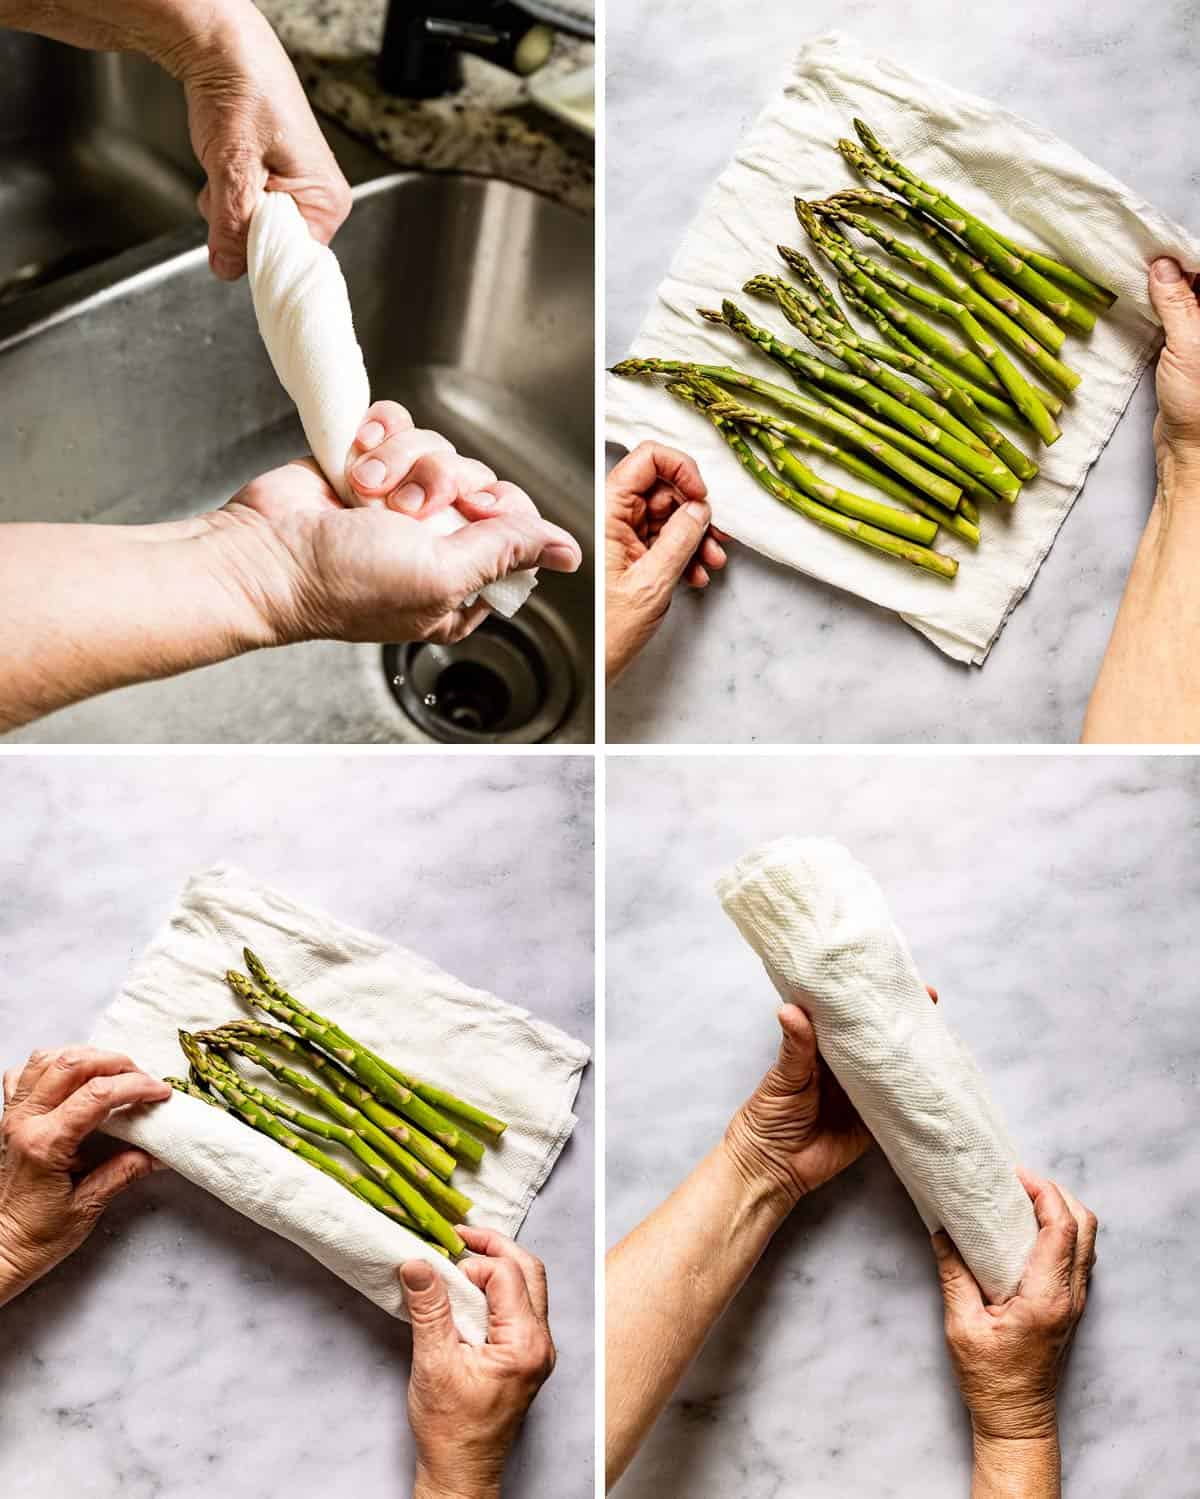 A collage of images showing how to steam asparagus in the microwave.